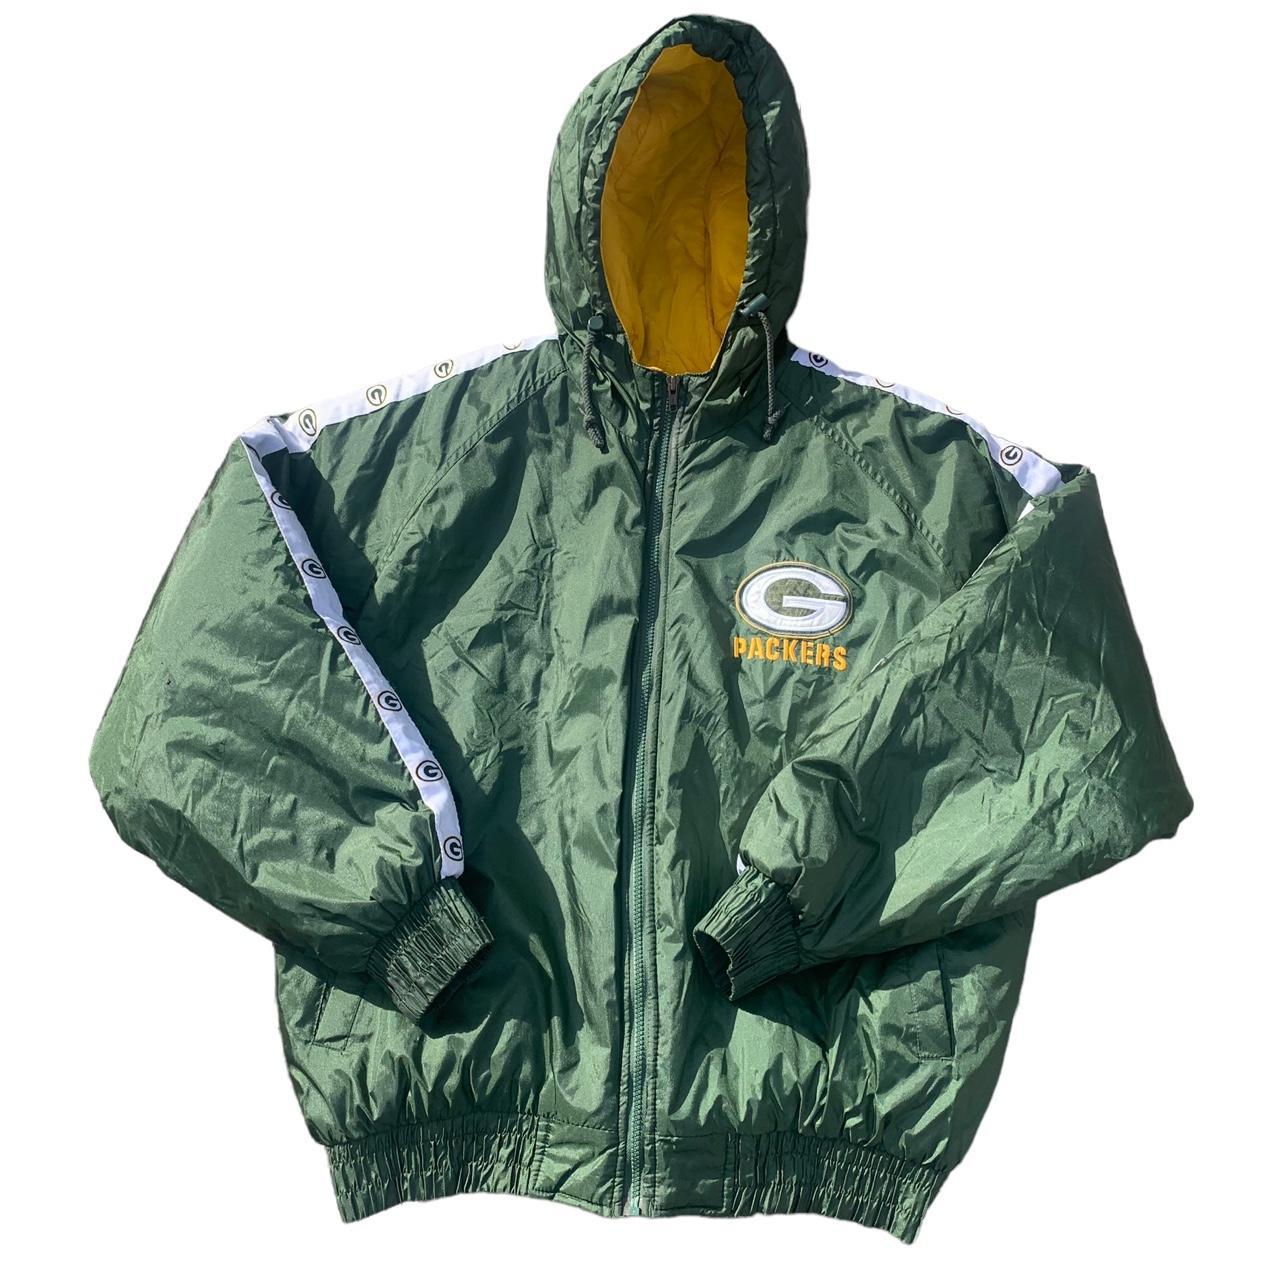 American Vintage Men's Green and Yellow Jacket